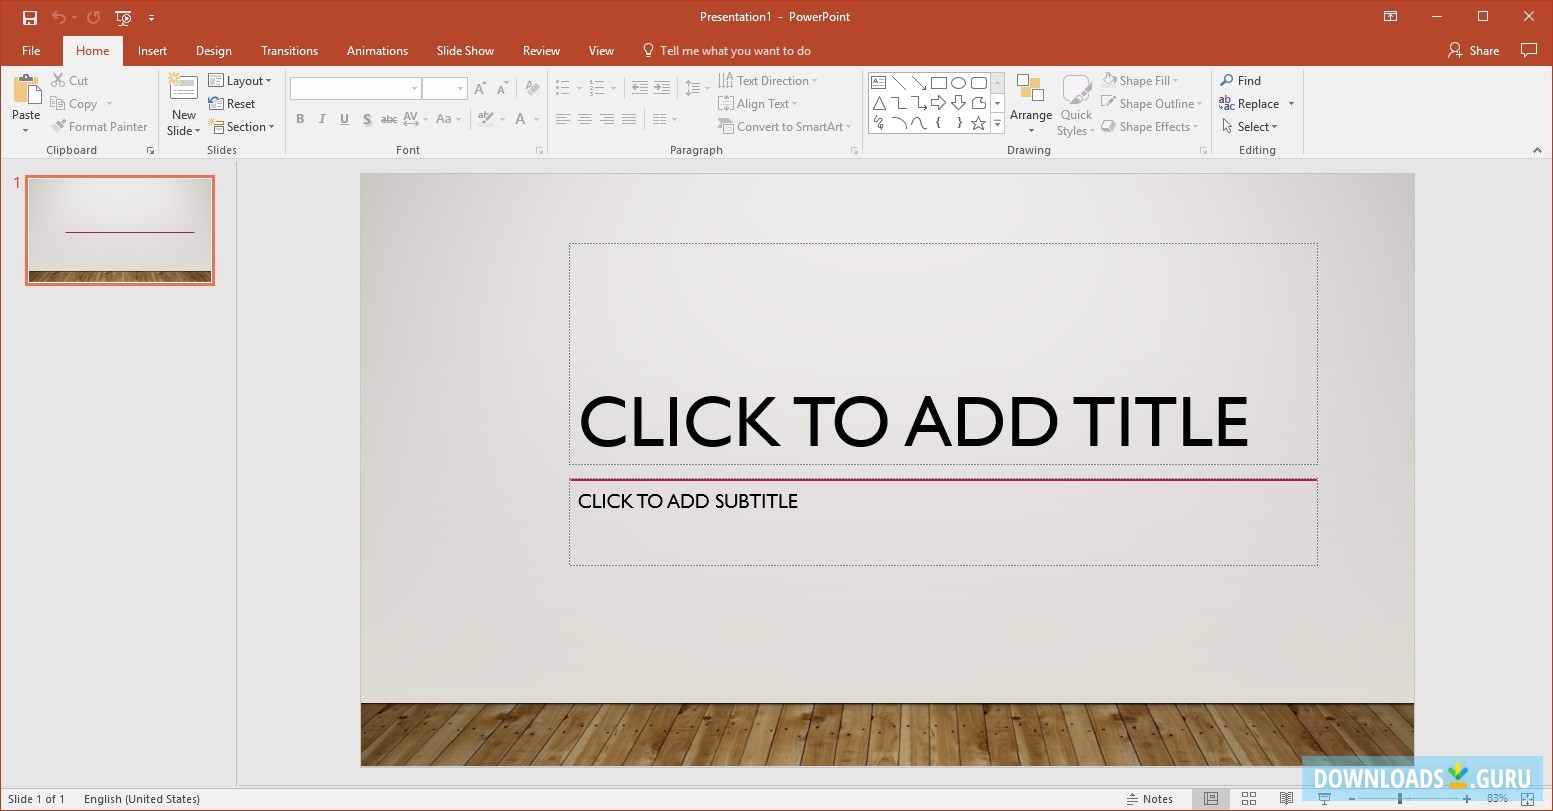 powerpoint 2019 download for windows 7